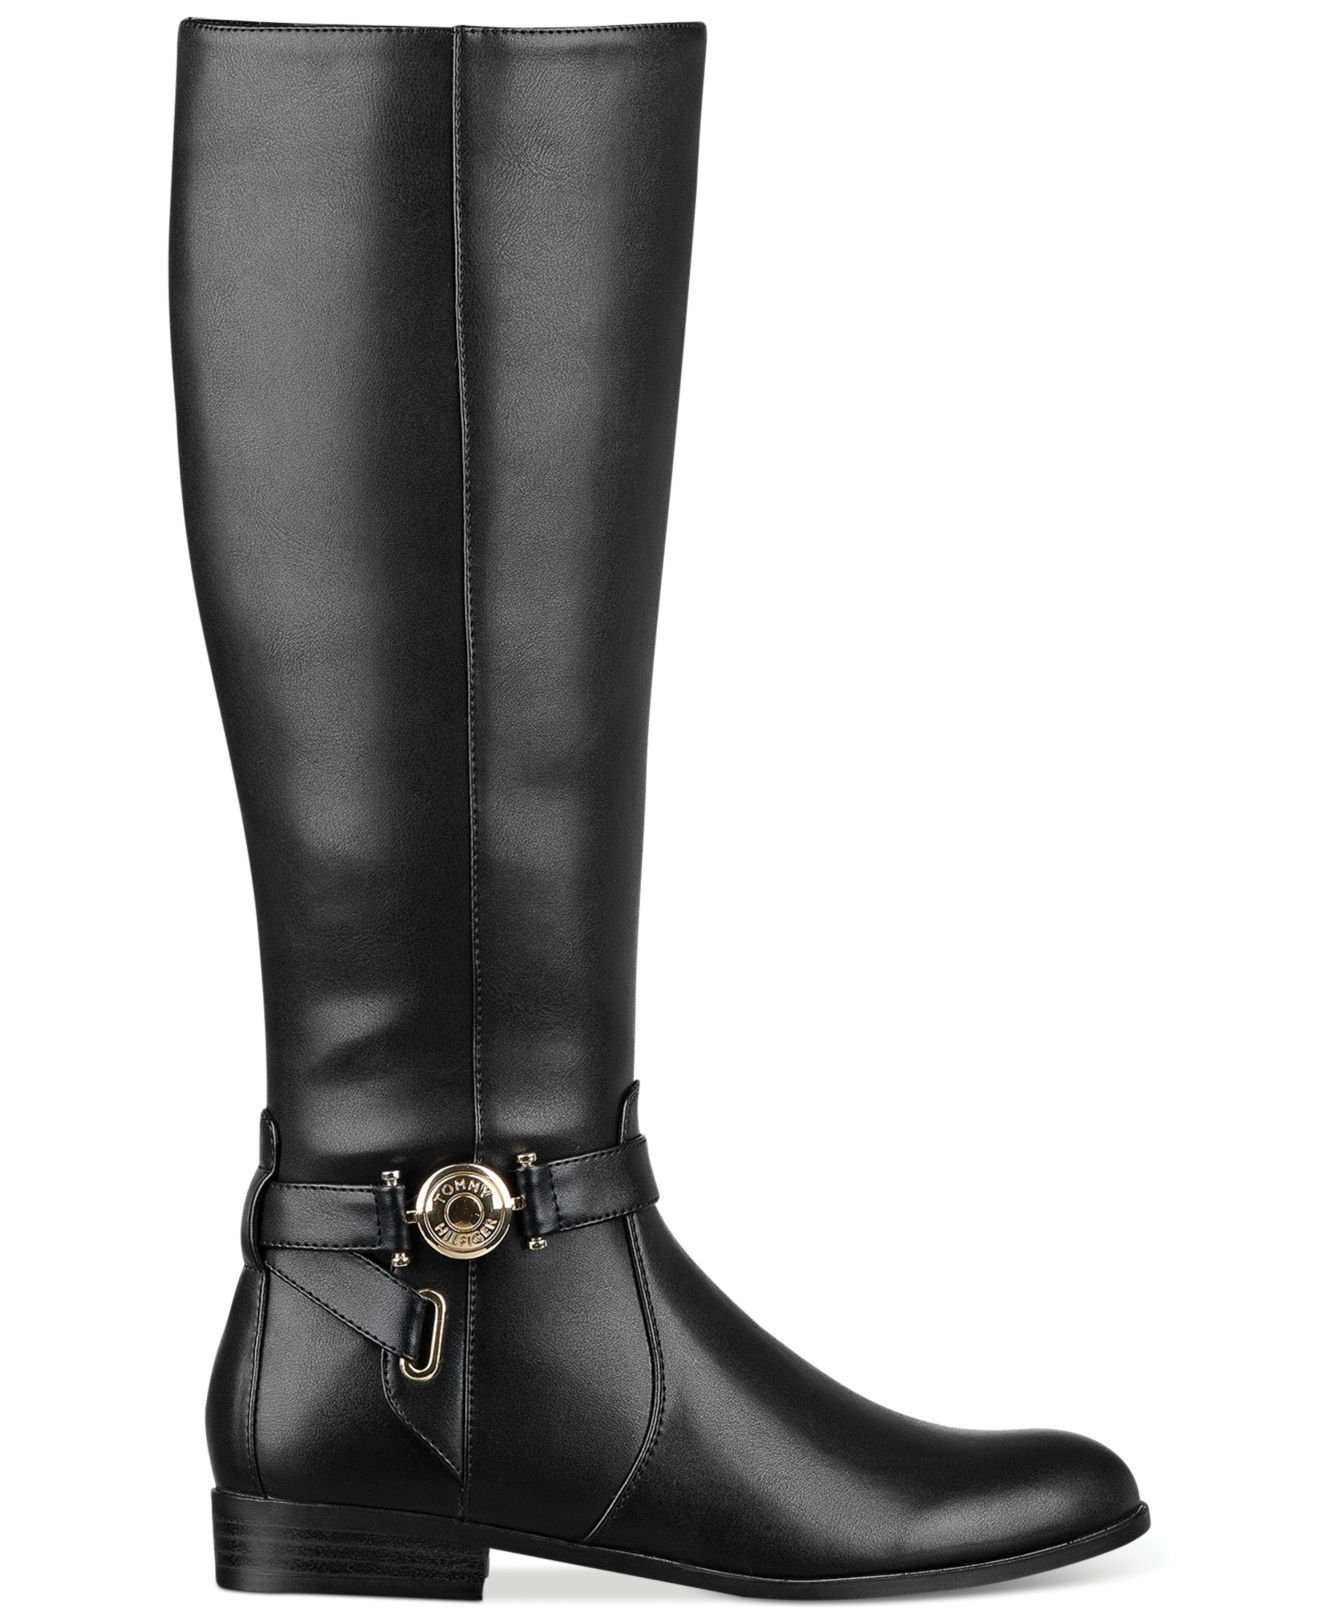 tommy hilfiger black riding boots